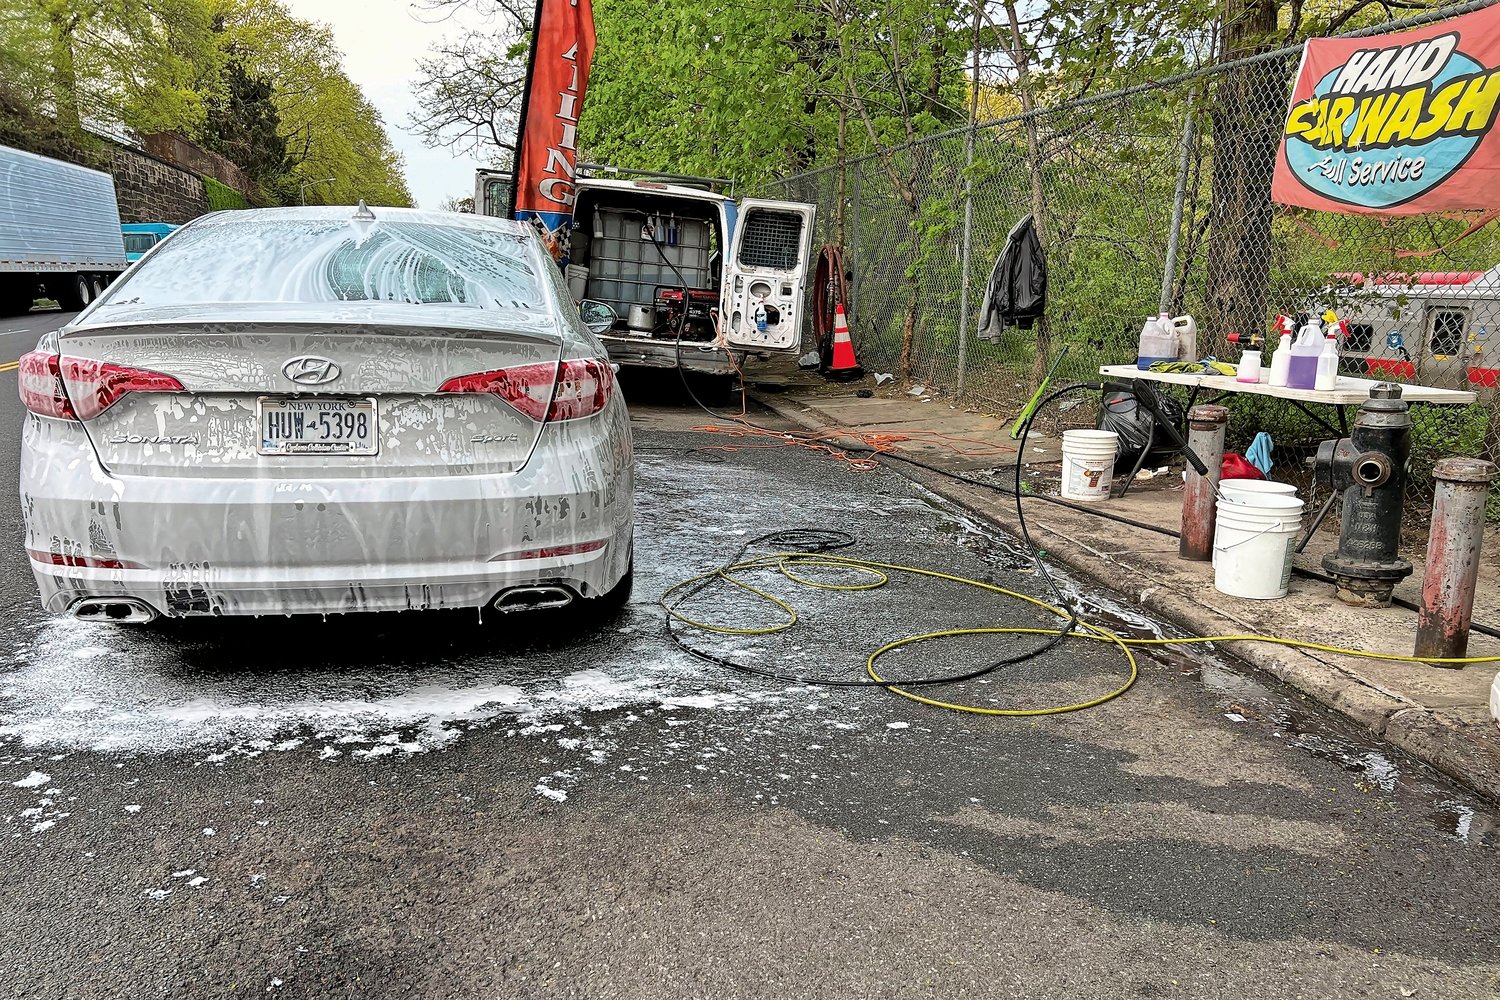 Residents have message: 'Stop working at all these car washes